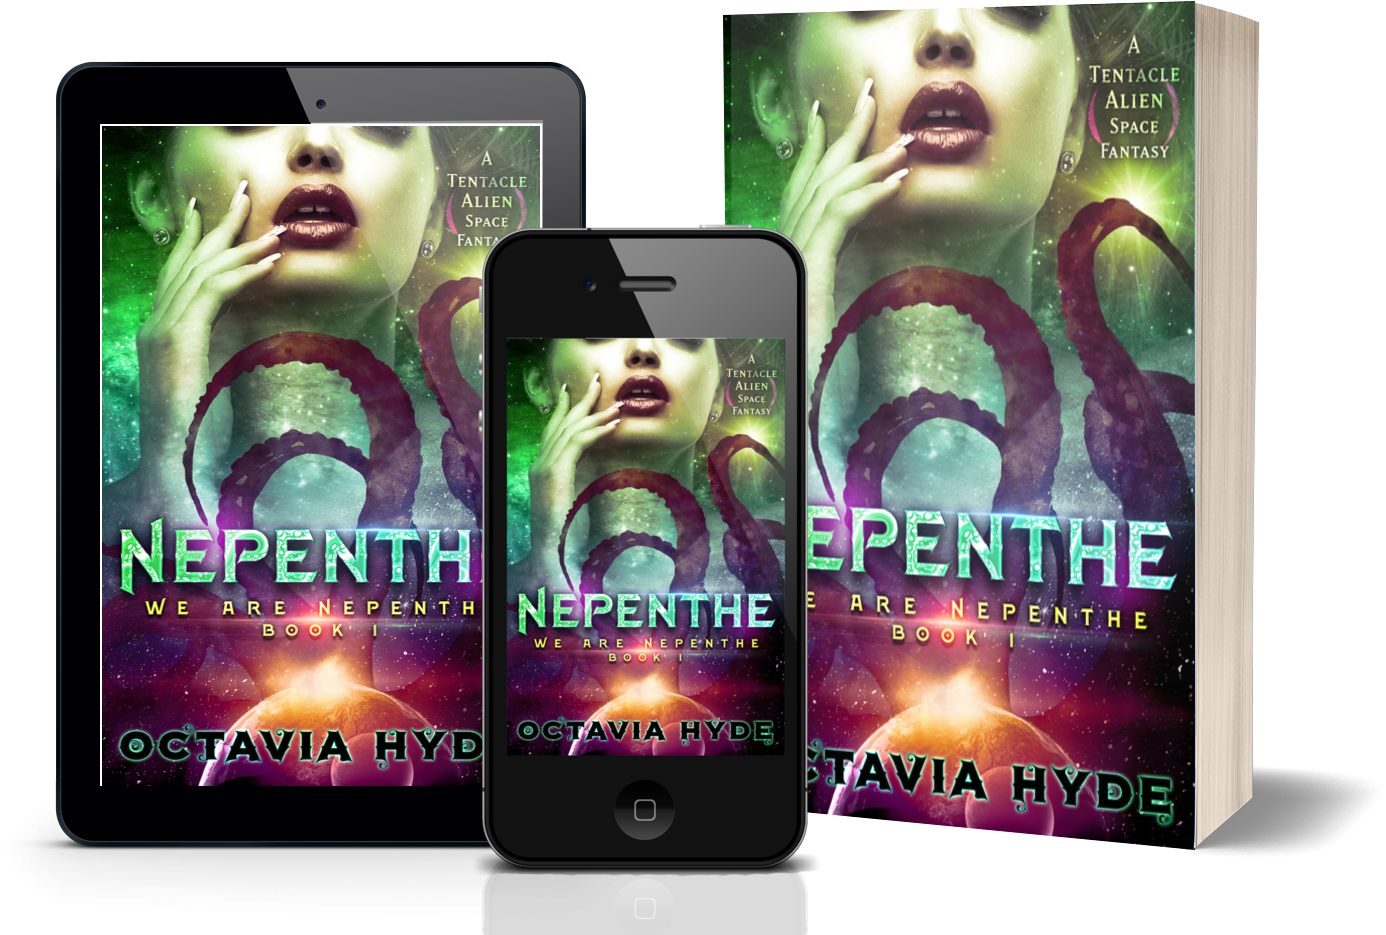 Nepenthe by Octavia Hyde, displayed in e-reader, phone, and paperback formats